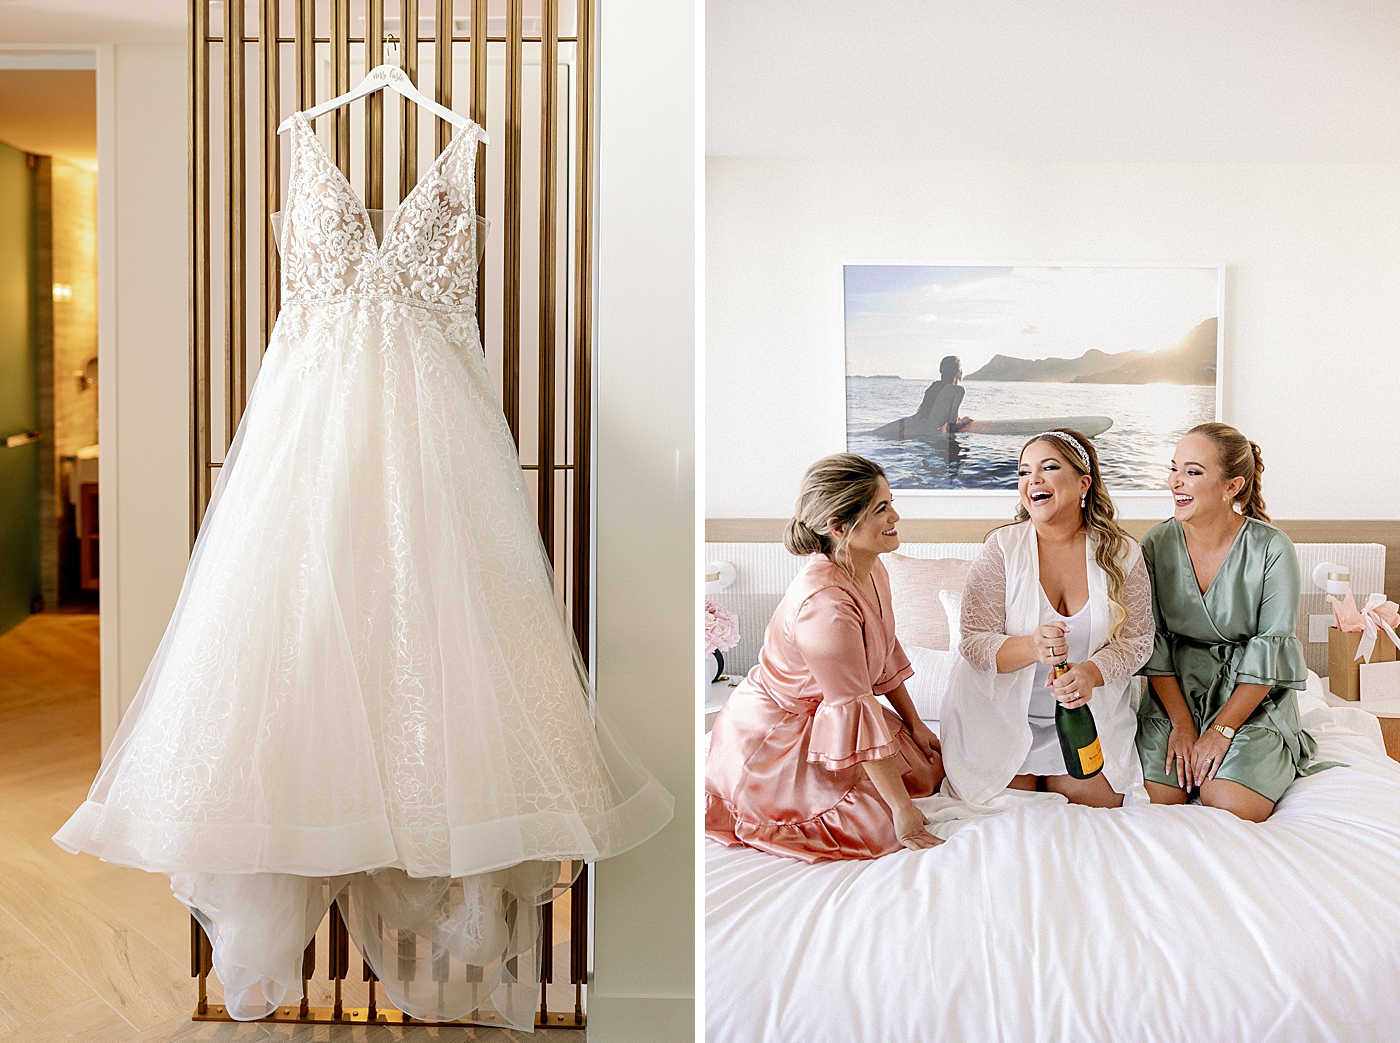 Getting ready shot of Wedding dress hanging and Bride and Bridesmaids popping Champaign Modern Elegant Wedding at The W South Beach captured by South Florida Wedding Photographer Erika Tuesta Photography